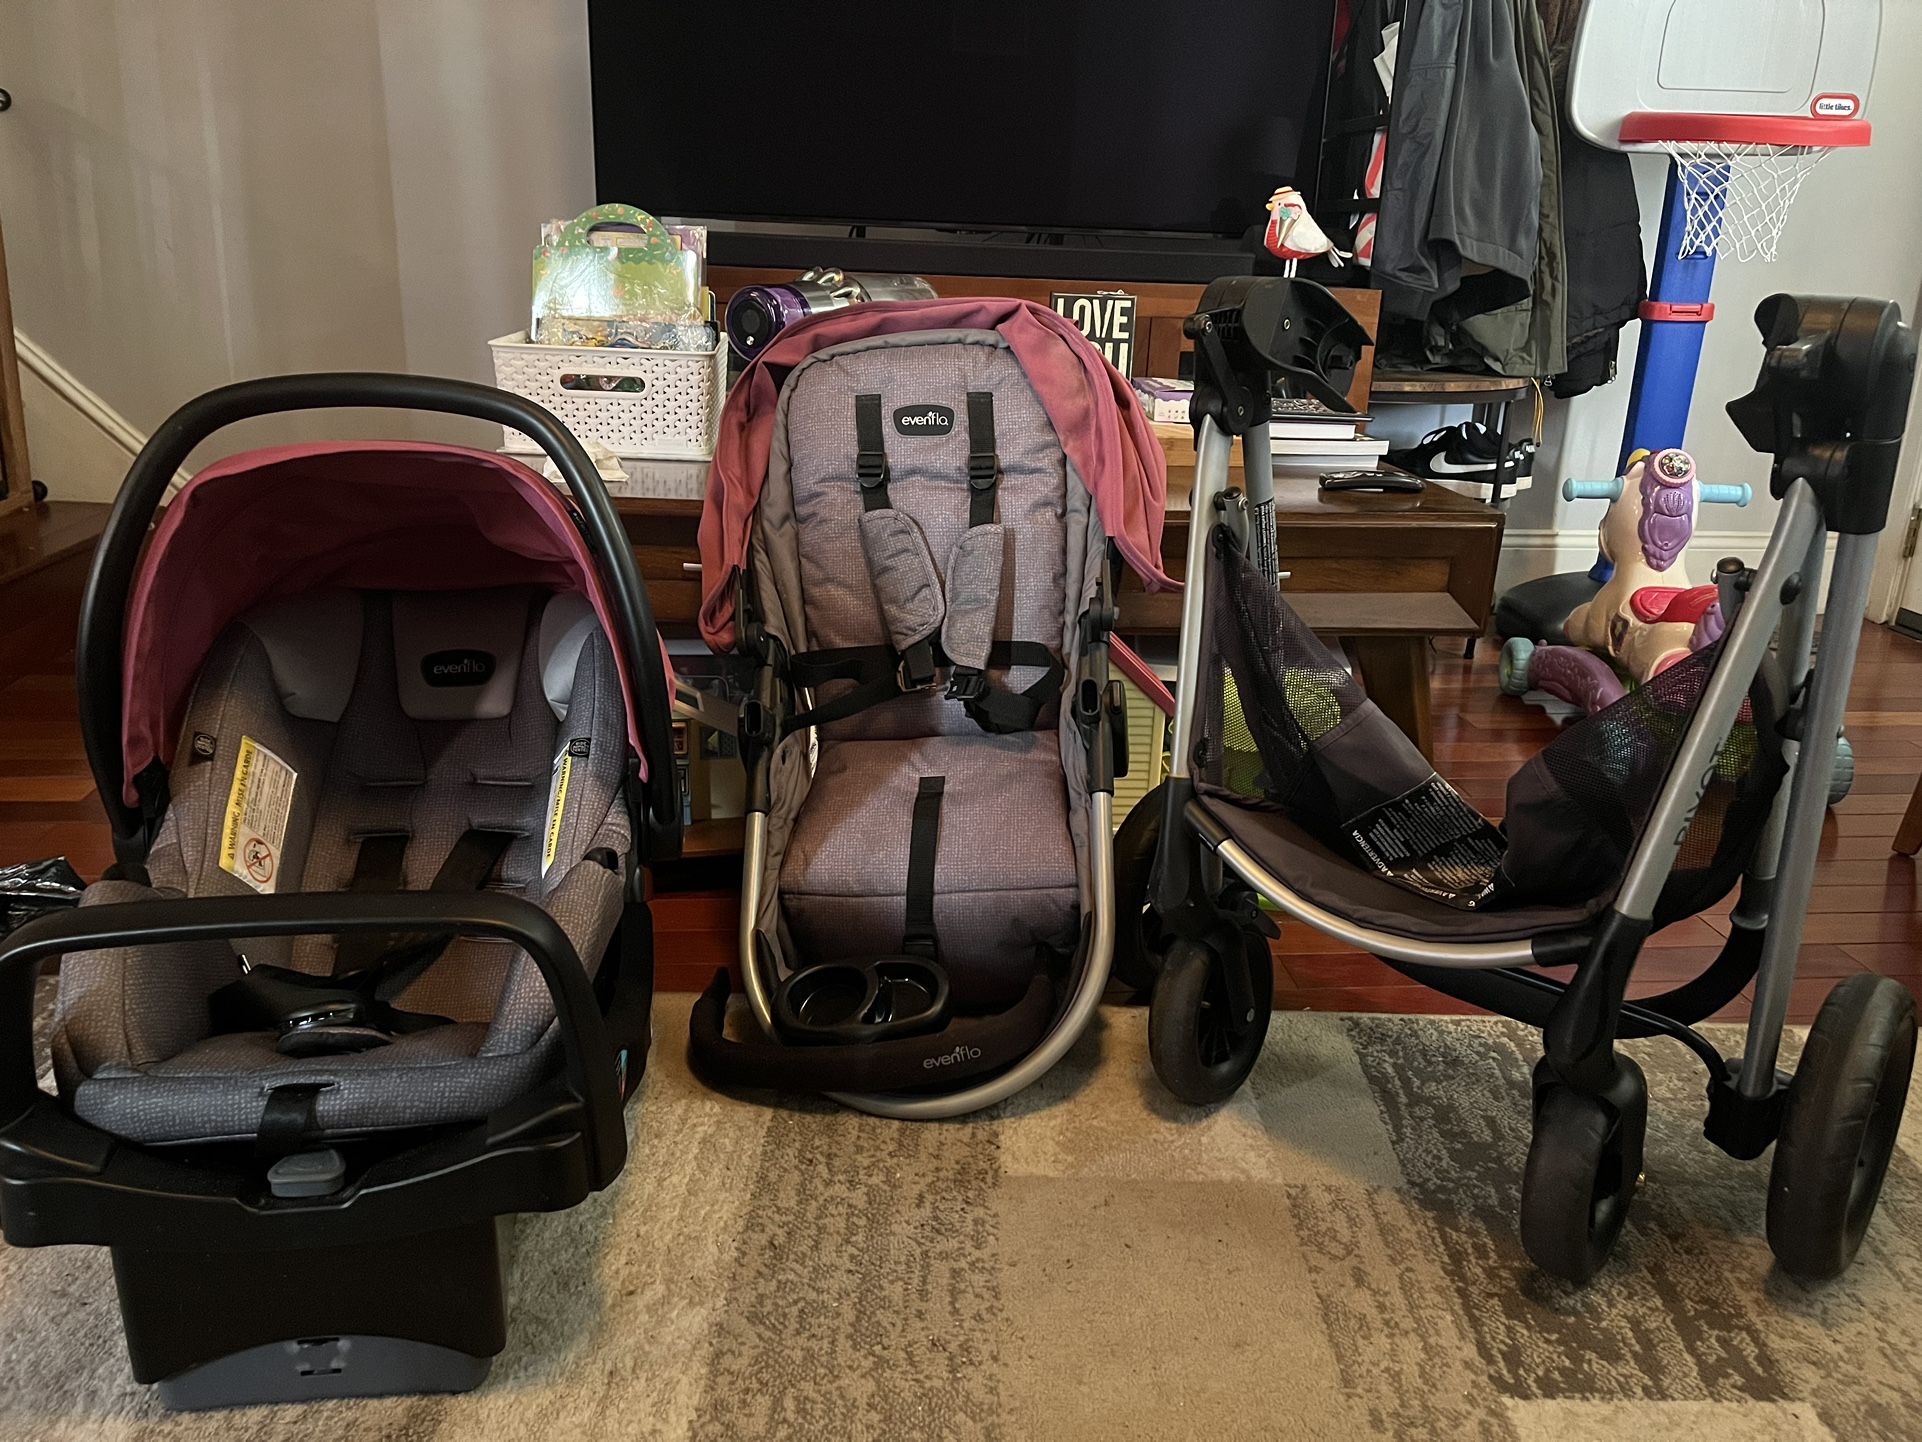 Evenflo Car Seat And Stroller 